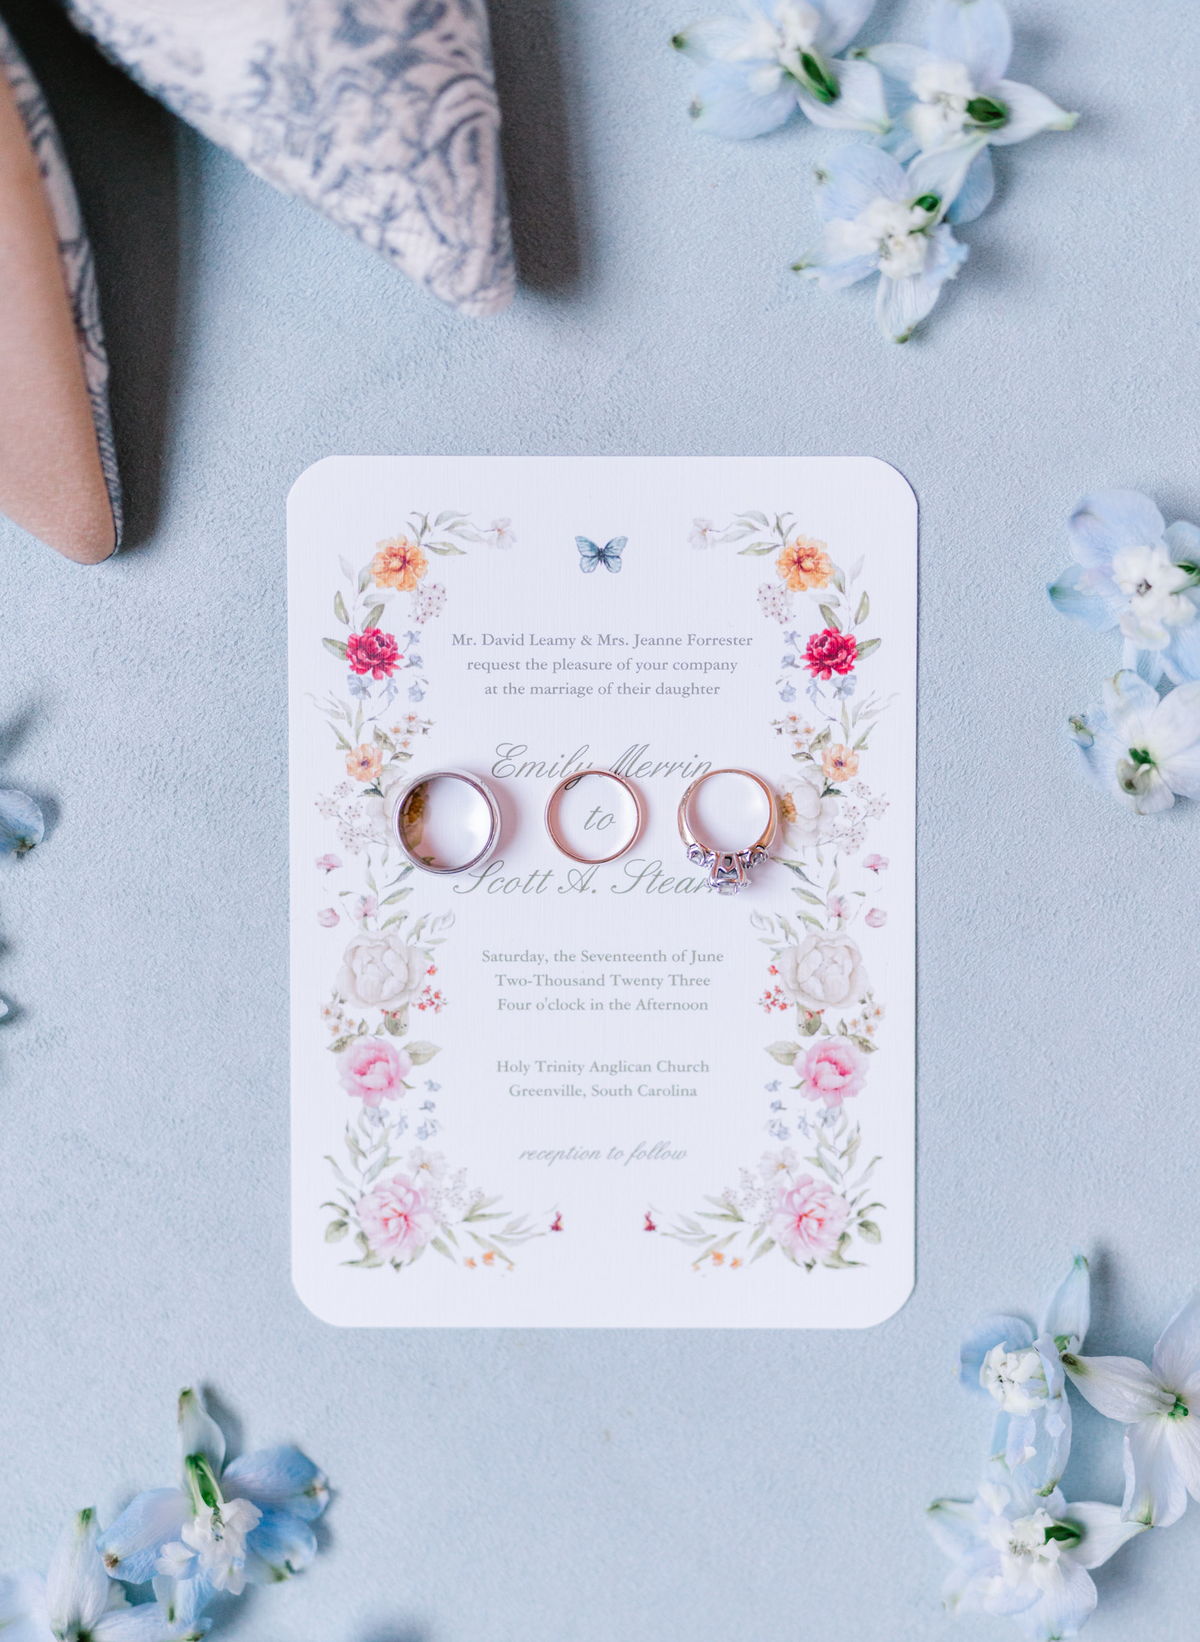 Details of Invitations and Rings